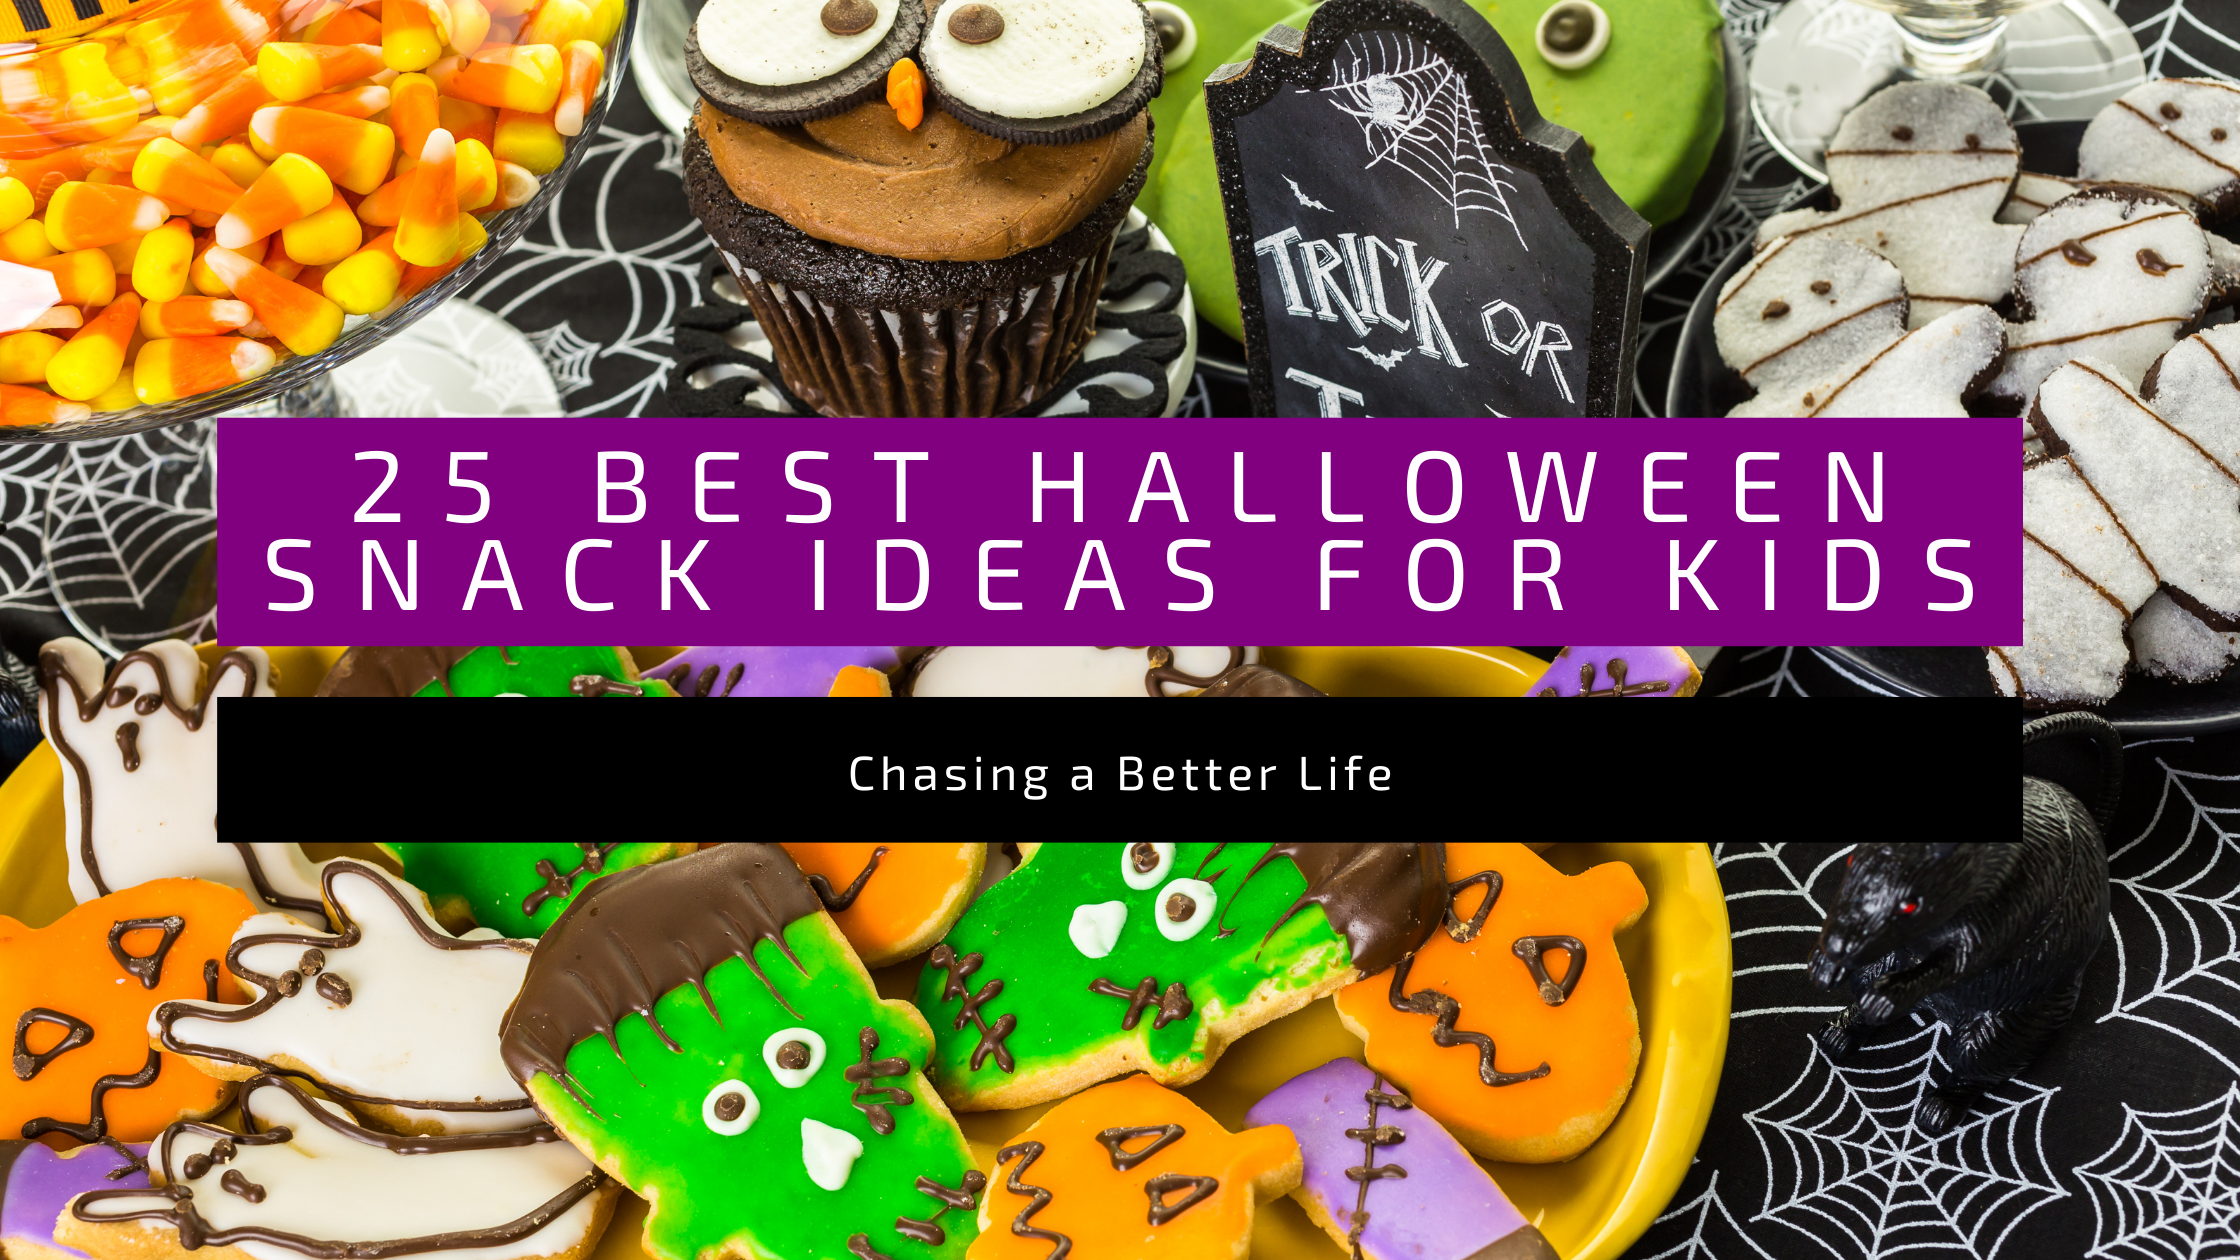 The 25 Best Halloween Snack Ideas for Kids 8